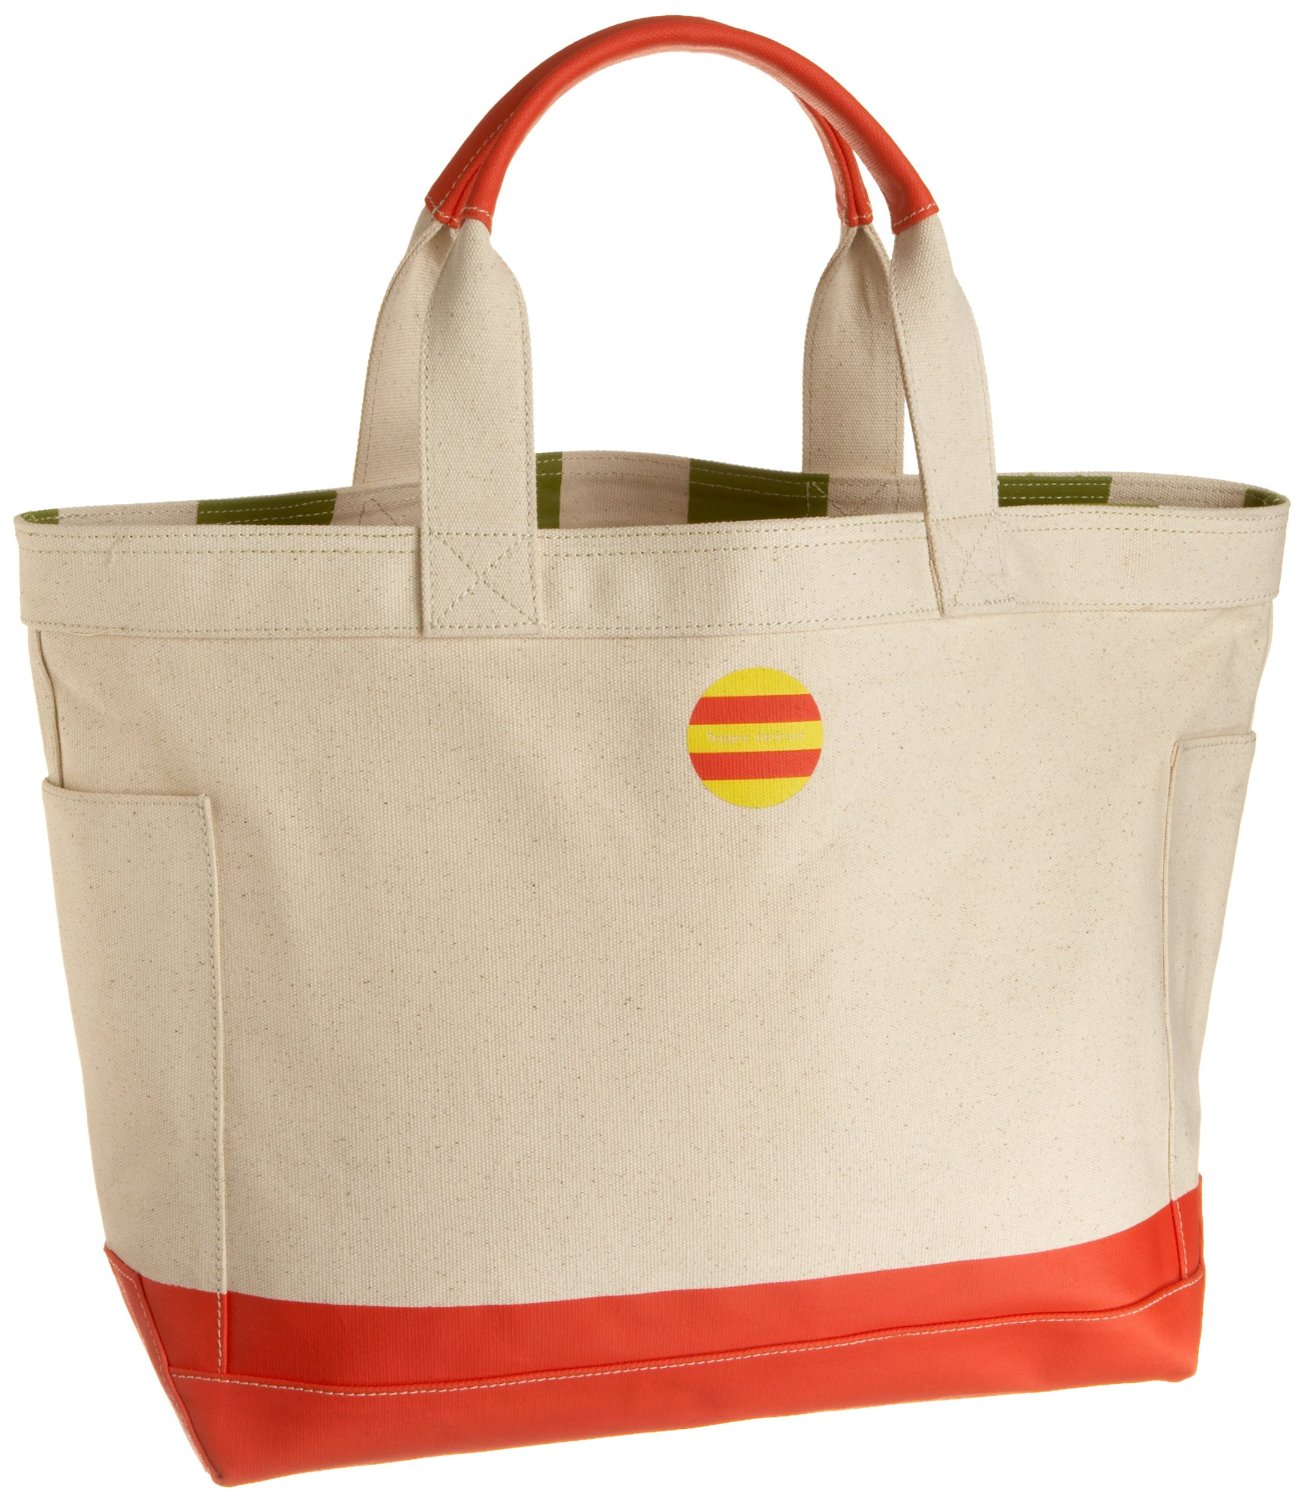 Tote Meaning and Definition